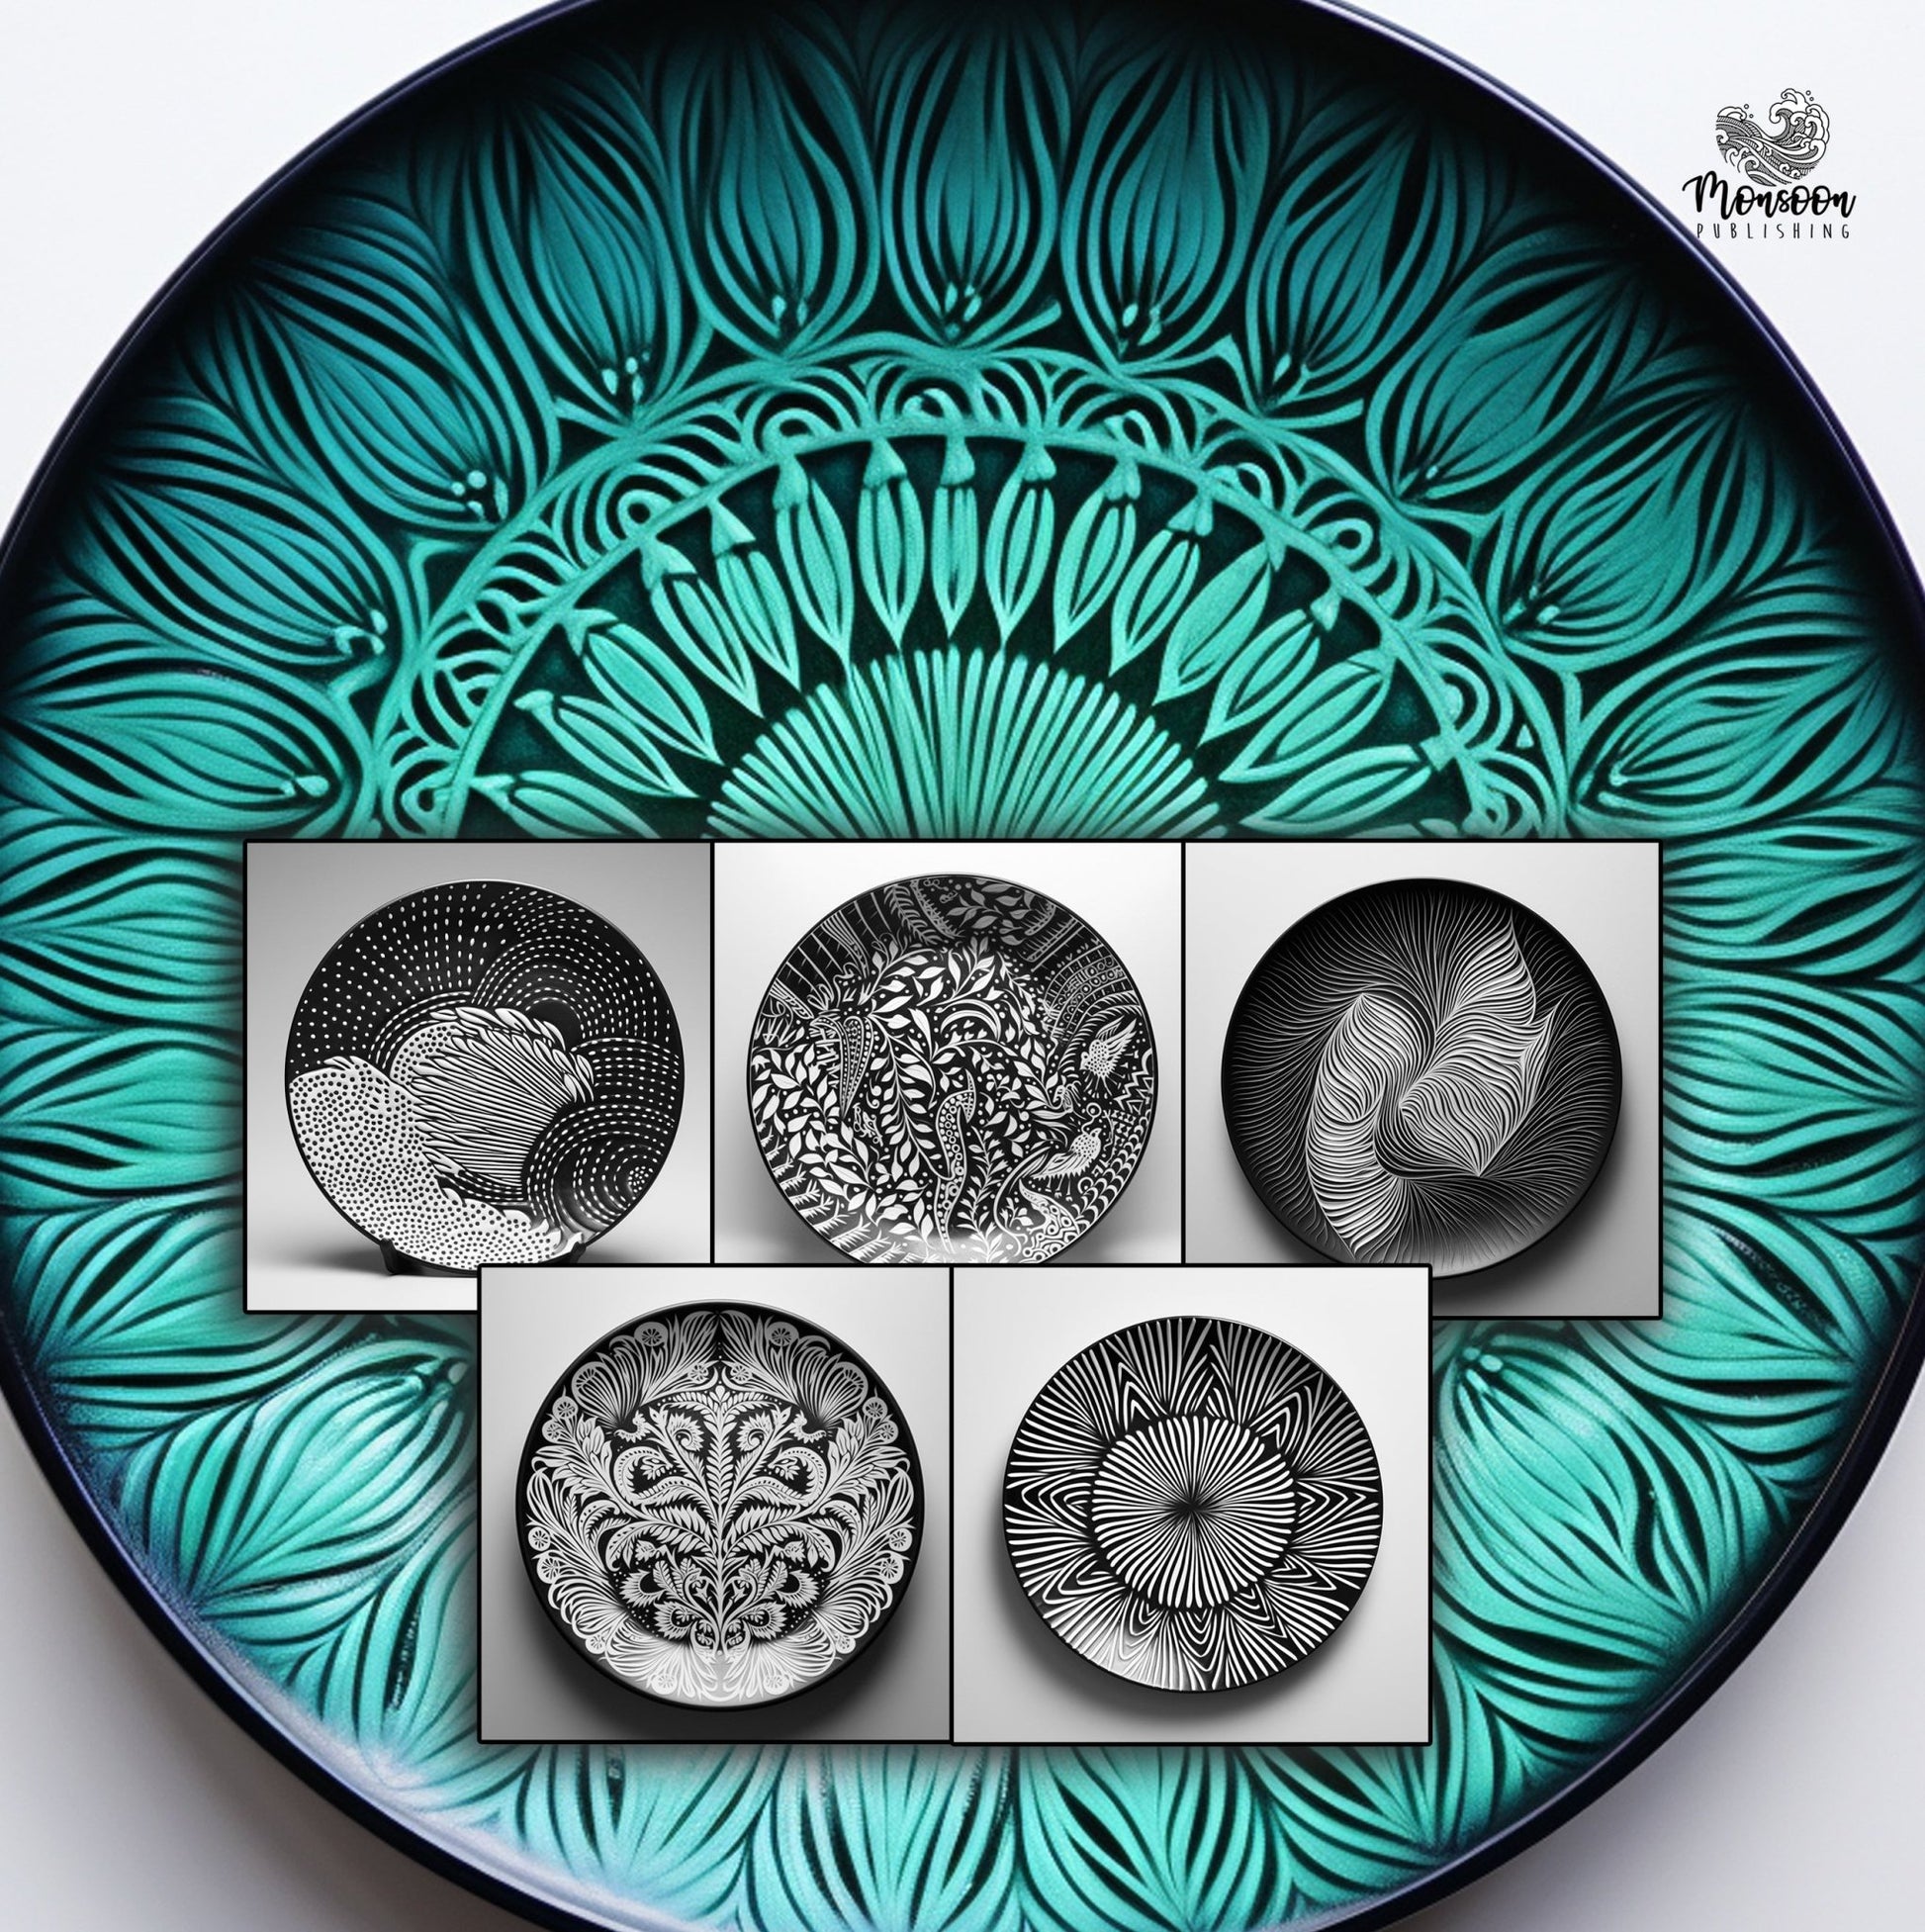 Plates with Patterns Coloring Book (Printbook) - Monsoon Publishing USA